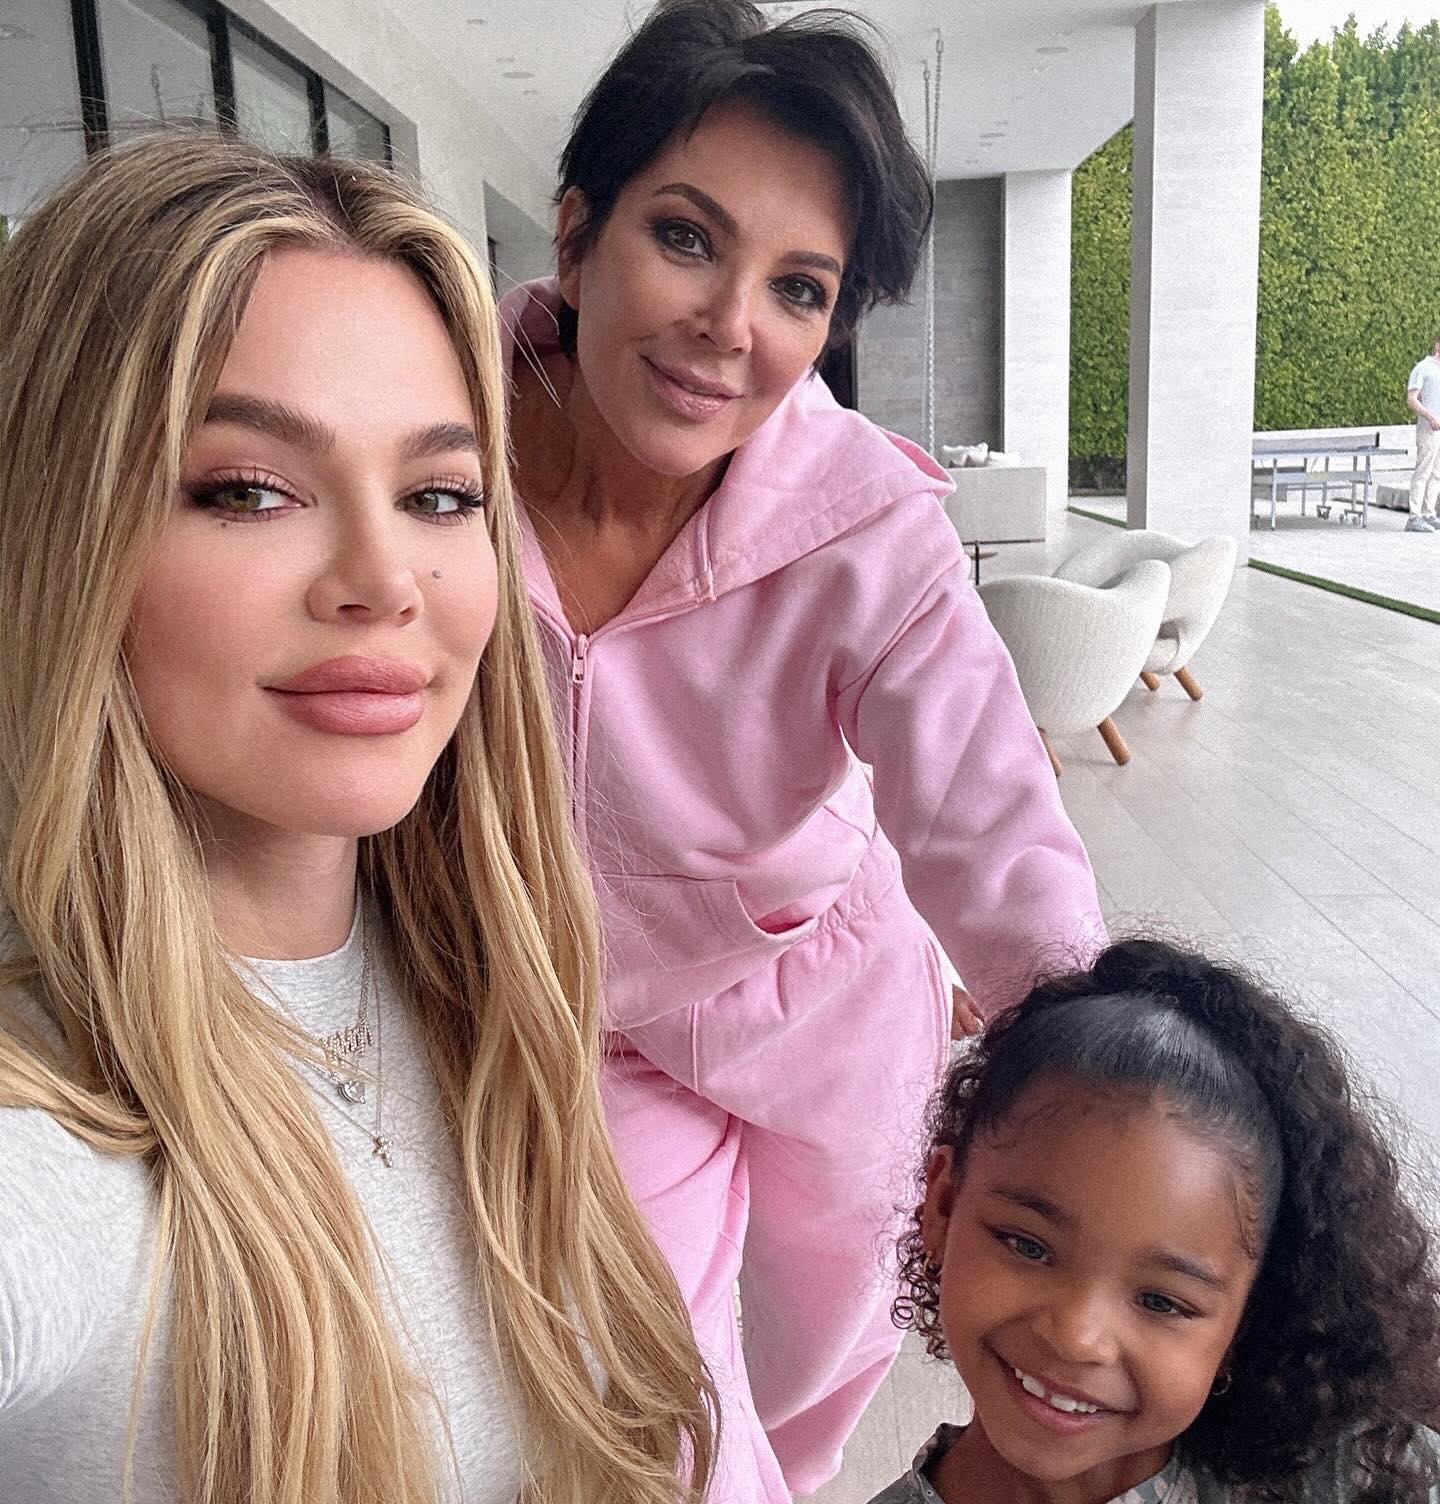 Last year on Easter, Khloe faced comments from fans voicing the same criticism